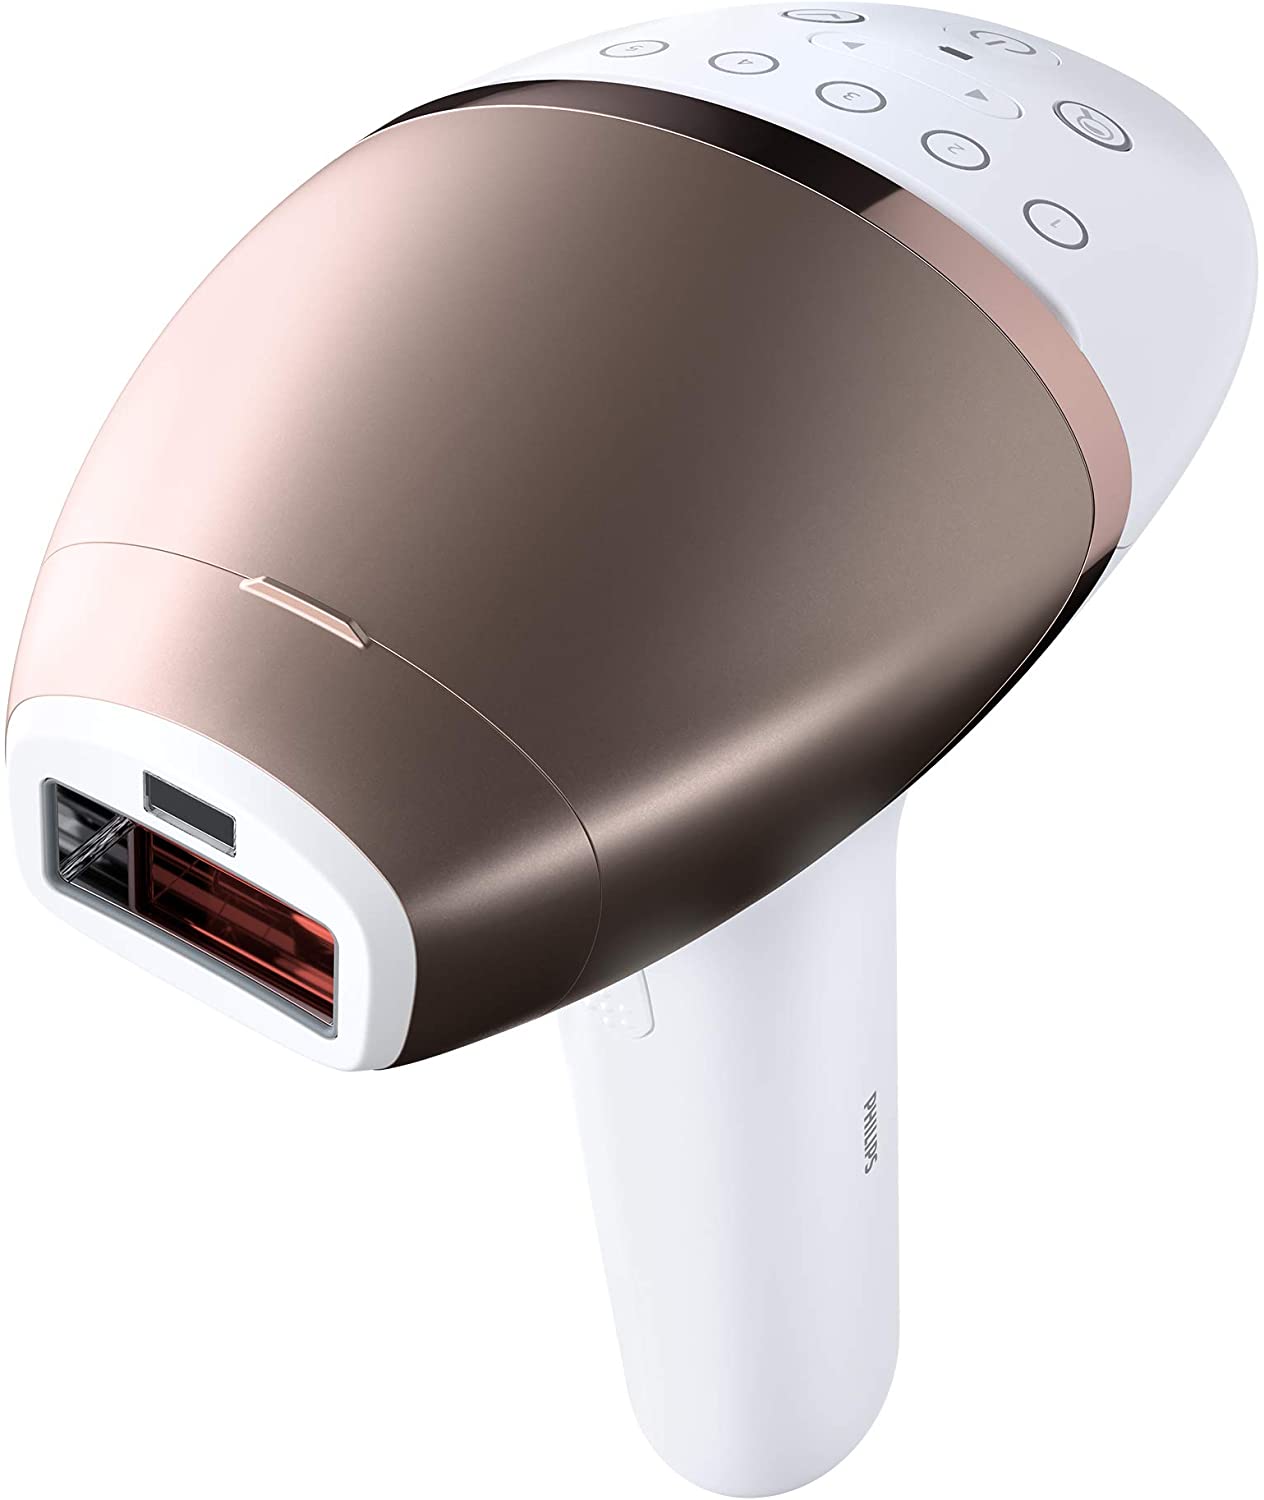 Philips Lumea IPL 9000 Series, cordless with 3 attachments for Body and  Face – BRI955/01